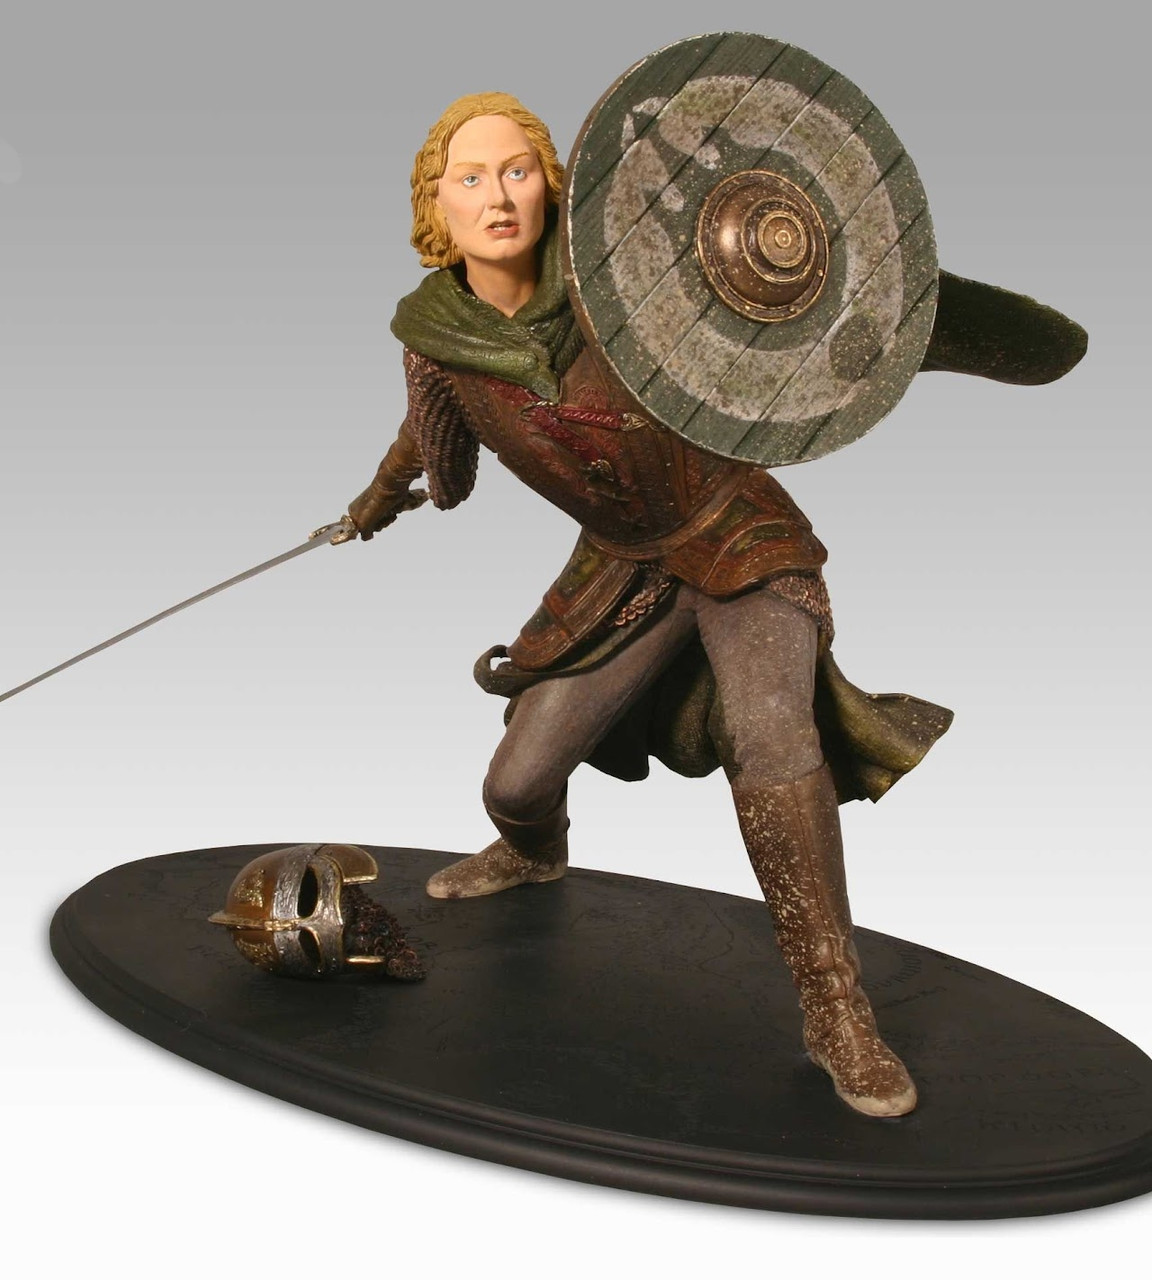 Eowyn (Shieldmaiden of Rohan) The Lord of the Rings Minifigures Toy Gift  797373342249 on eBid United States